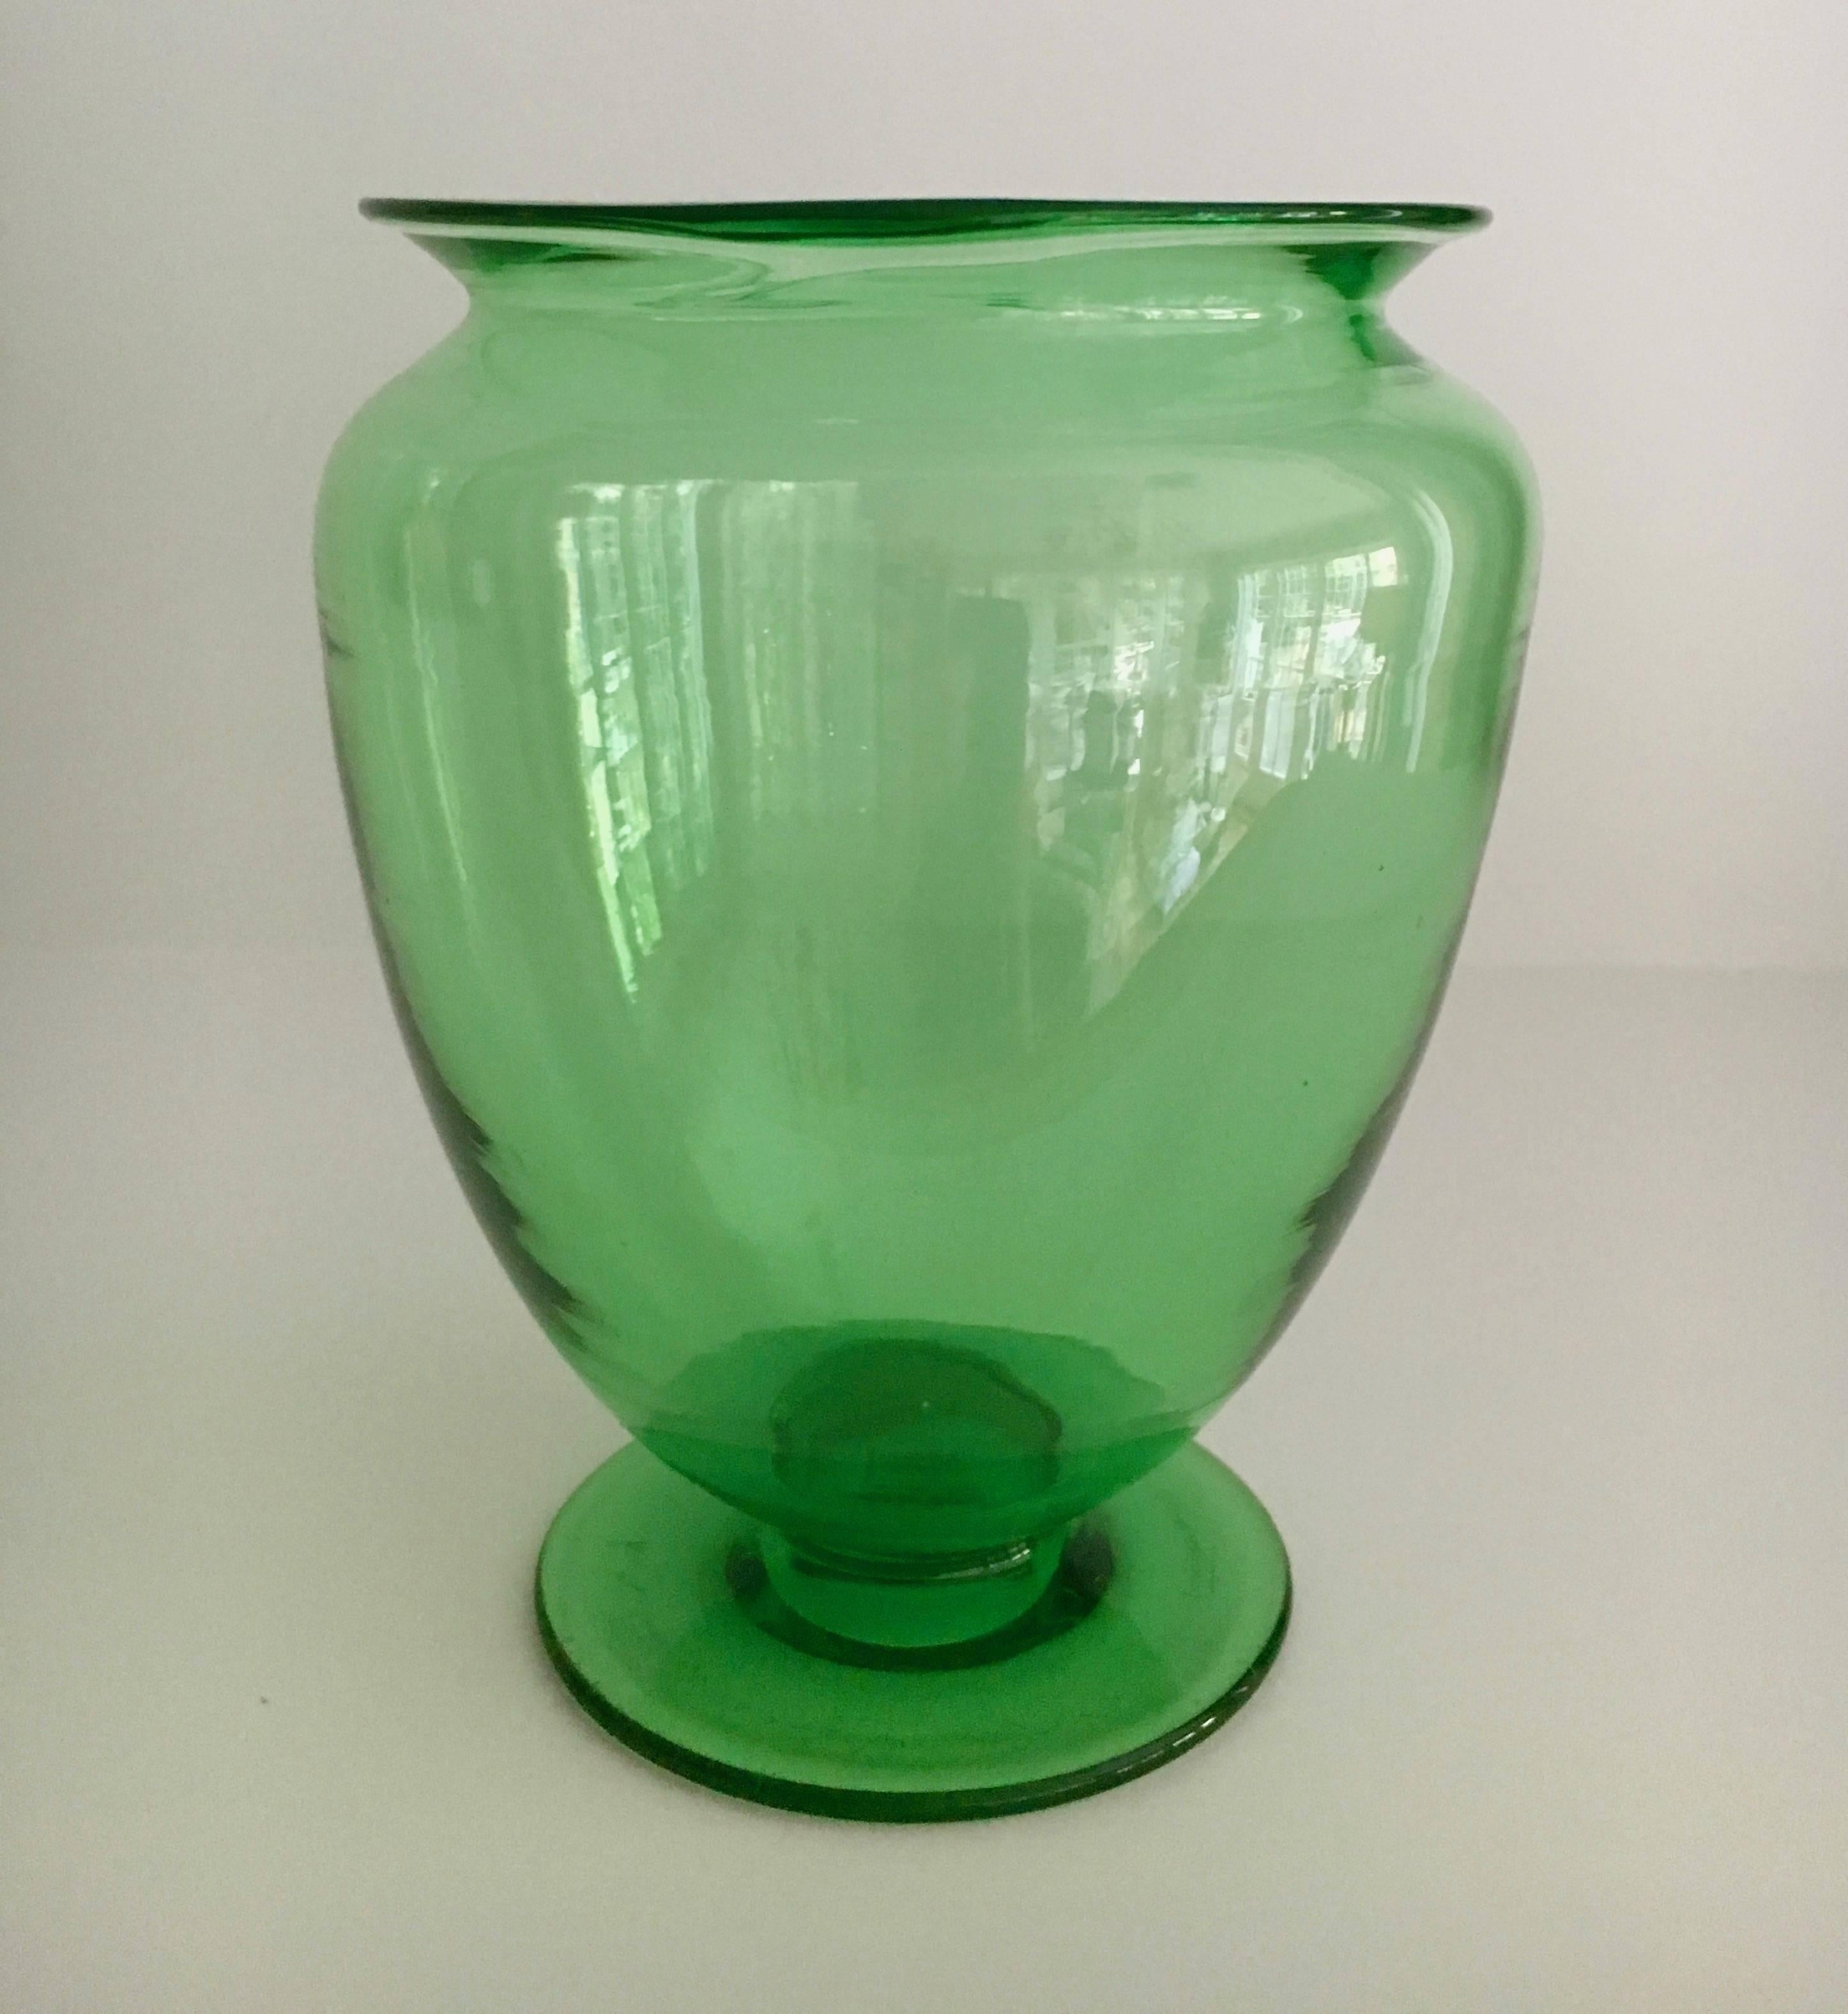 The green glass, shape and style of this piece are undoubtedly derived or borrowed from Steuben.  The vase is of quality and makes a handsome addition to any desk, bedside, guest room or small statement of flowers.